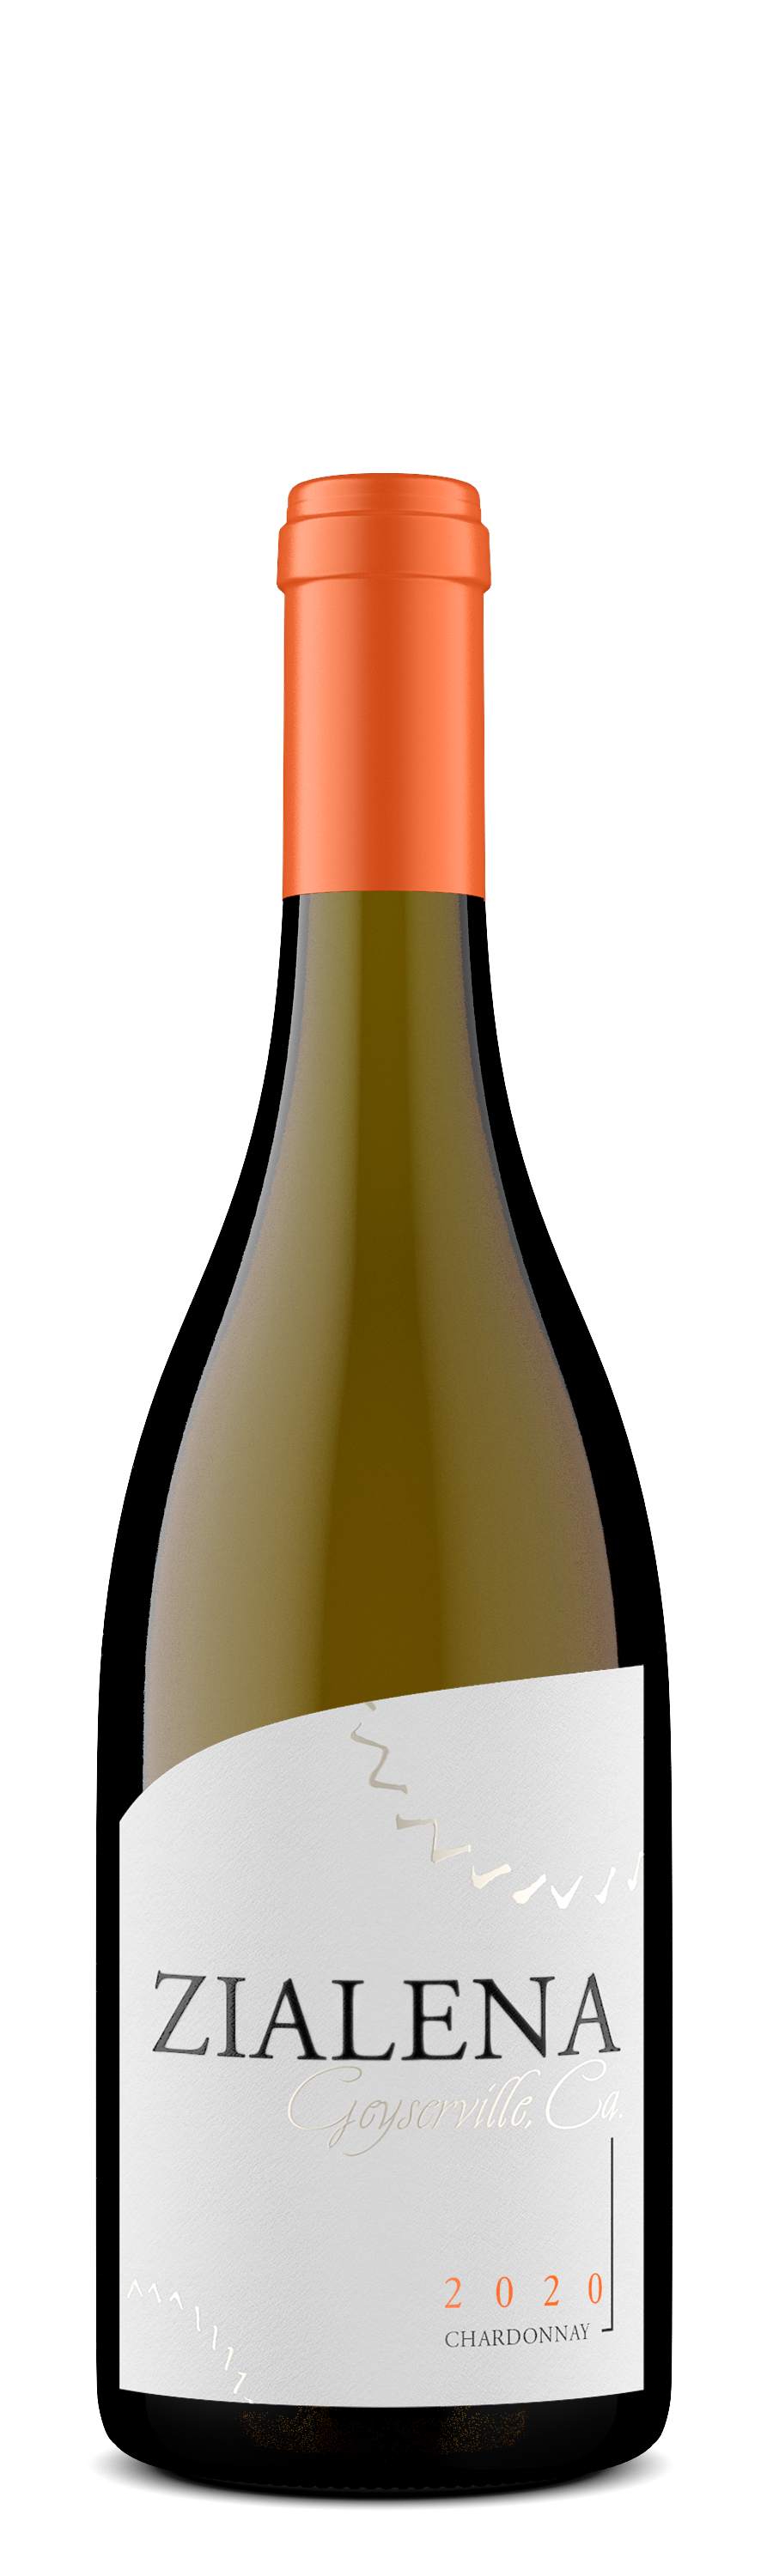 Product Image for 2020 Chardonnay